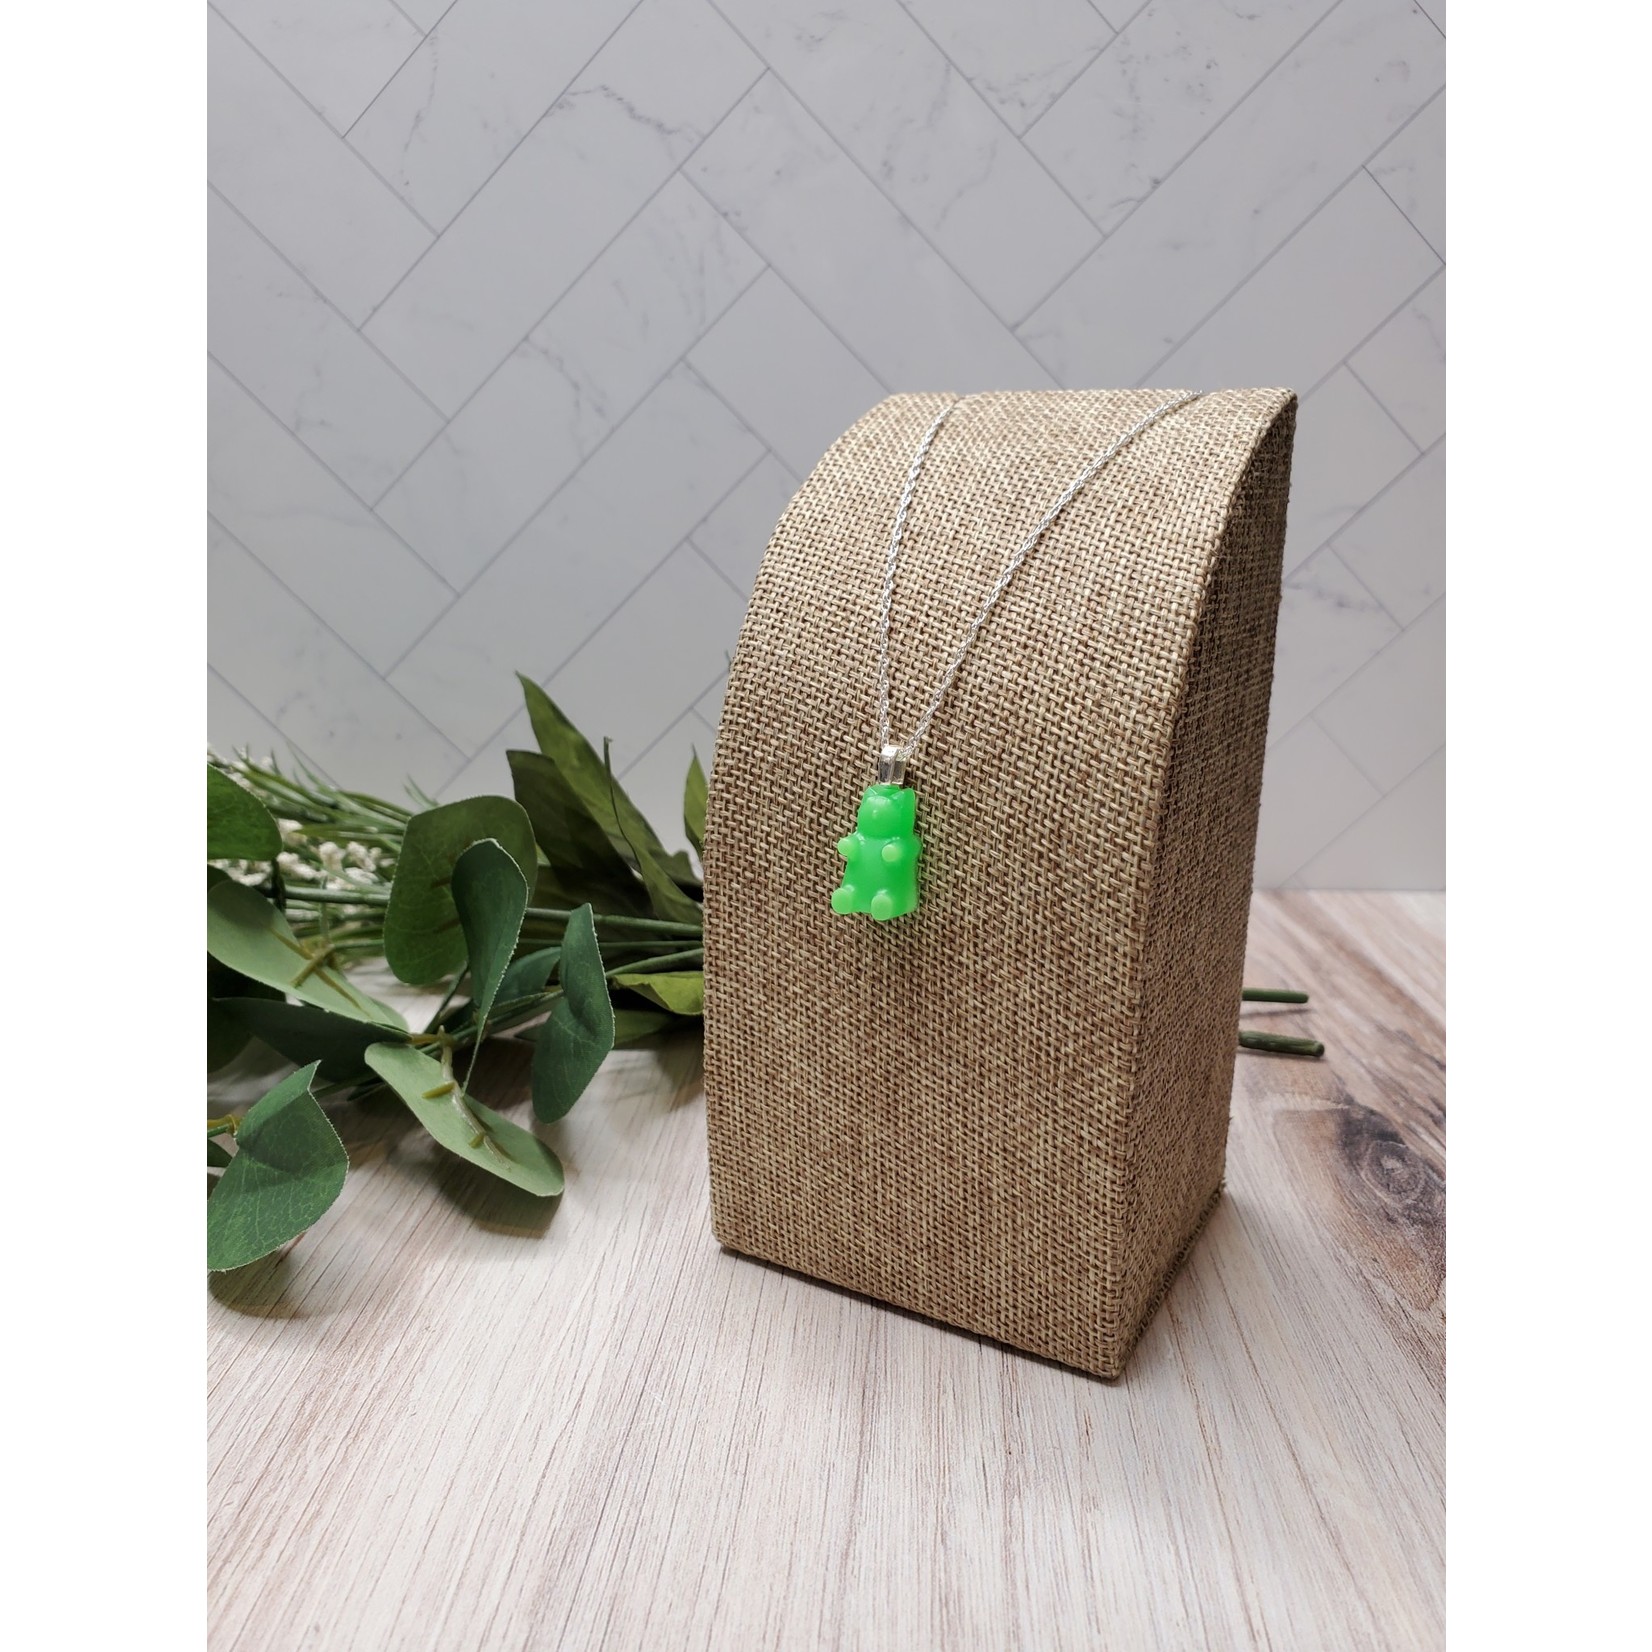 Stirling Studios Glow in the Dark Gummy Bear Necklace - Lime Green